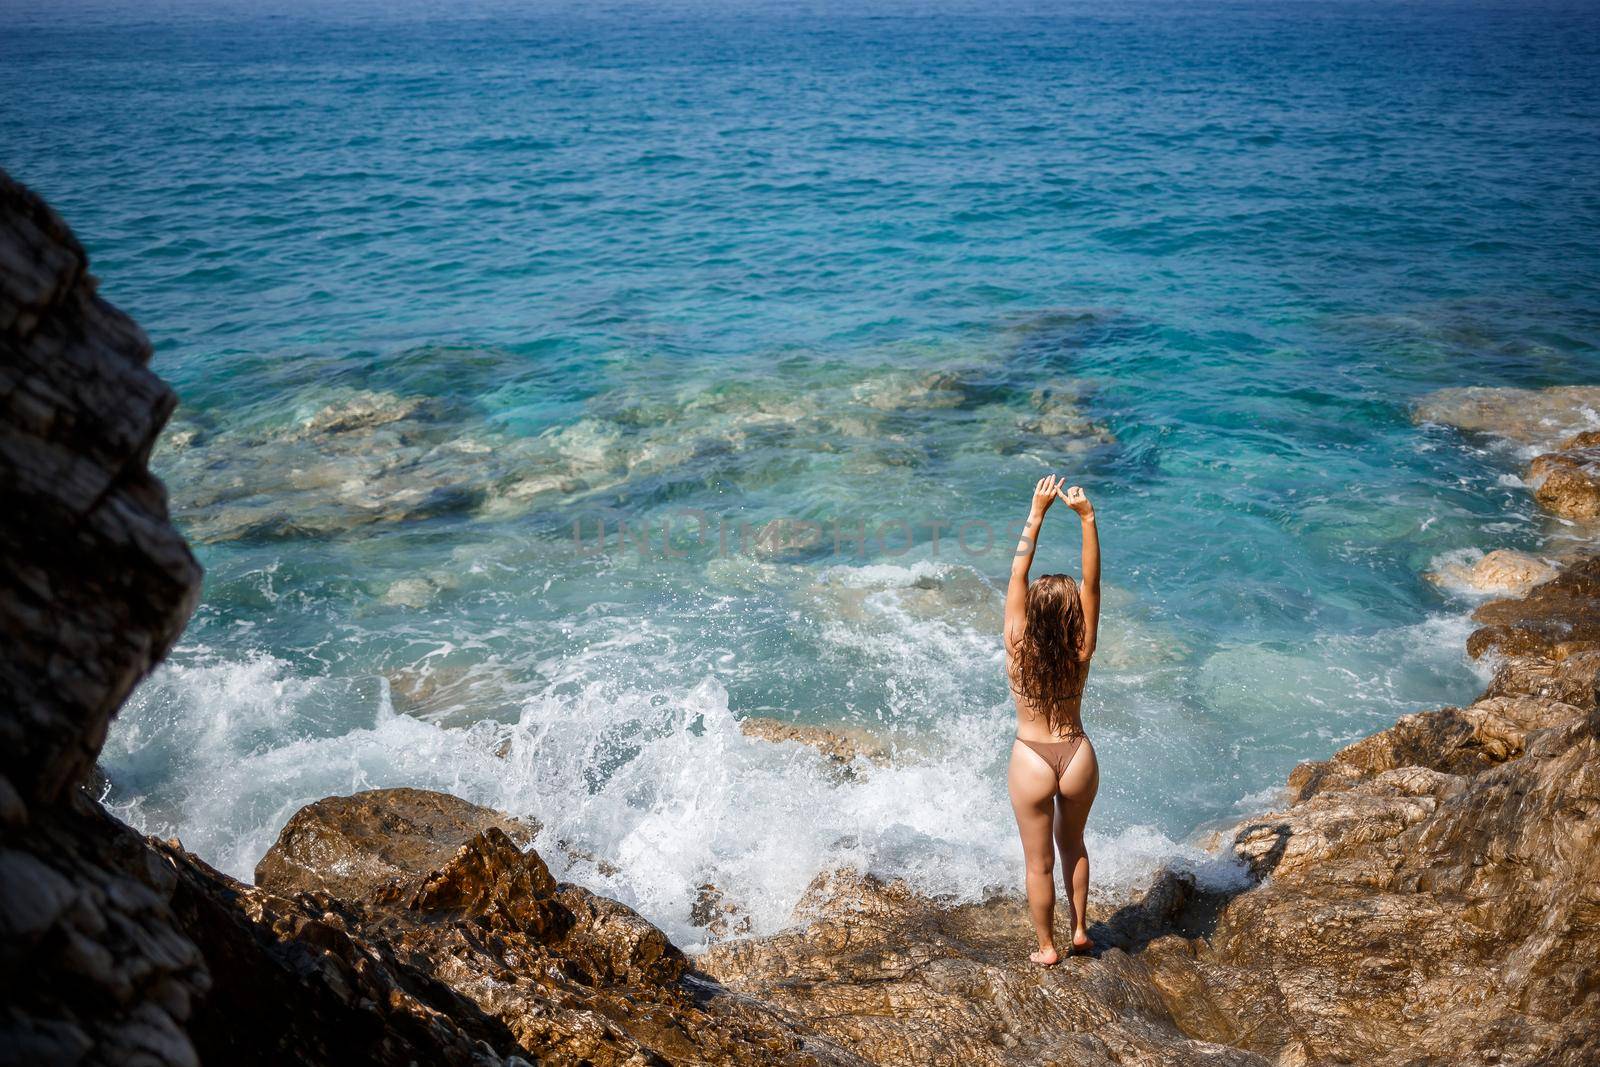 Sexy woman in full body swimsuit with long hair walks on large rocks on a rocky beach during a storm at sea. Back view. Woman swimwear island tropics landscape exotic walk by Dmitrytph